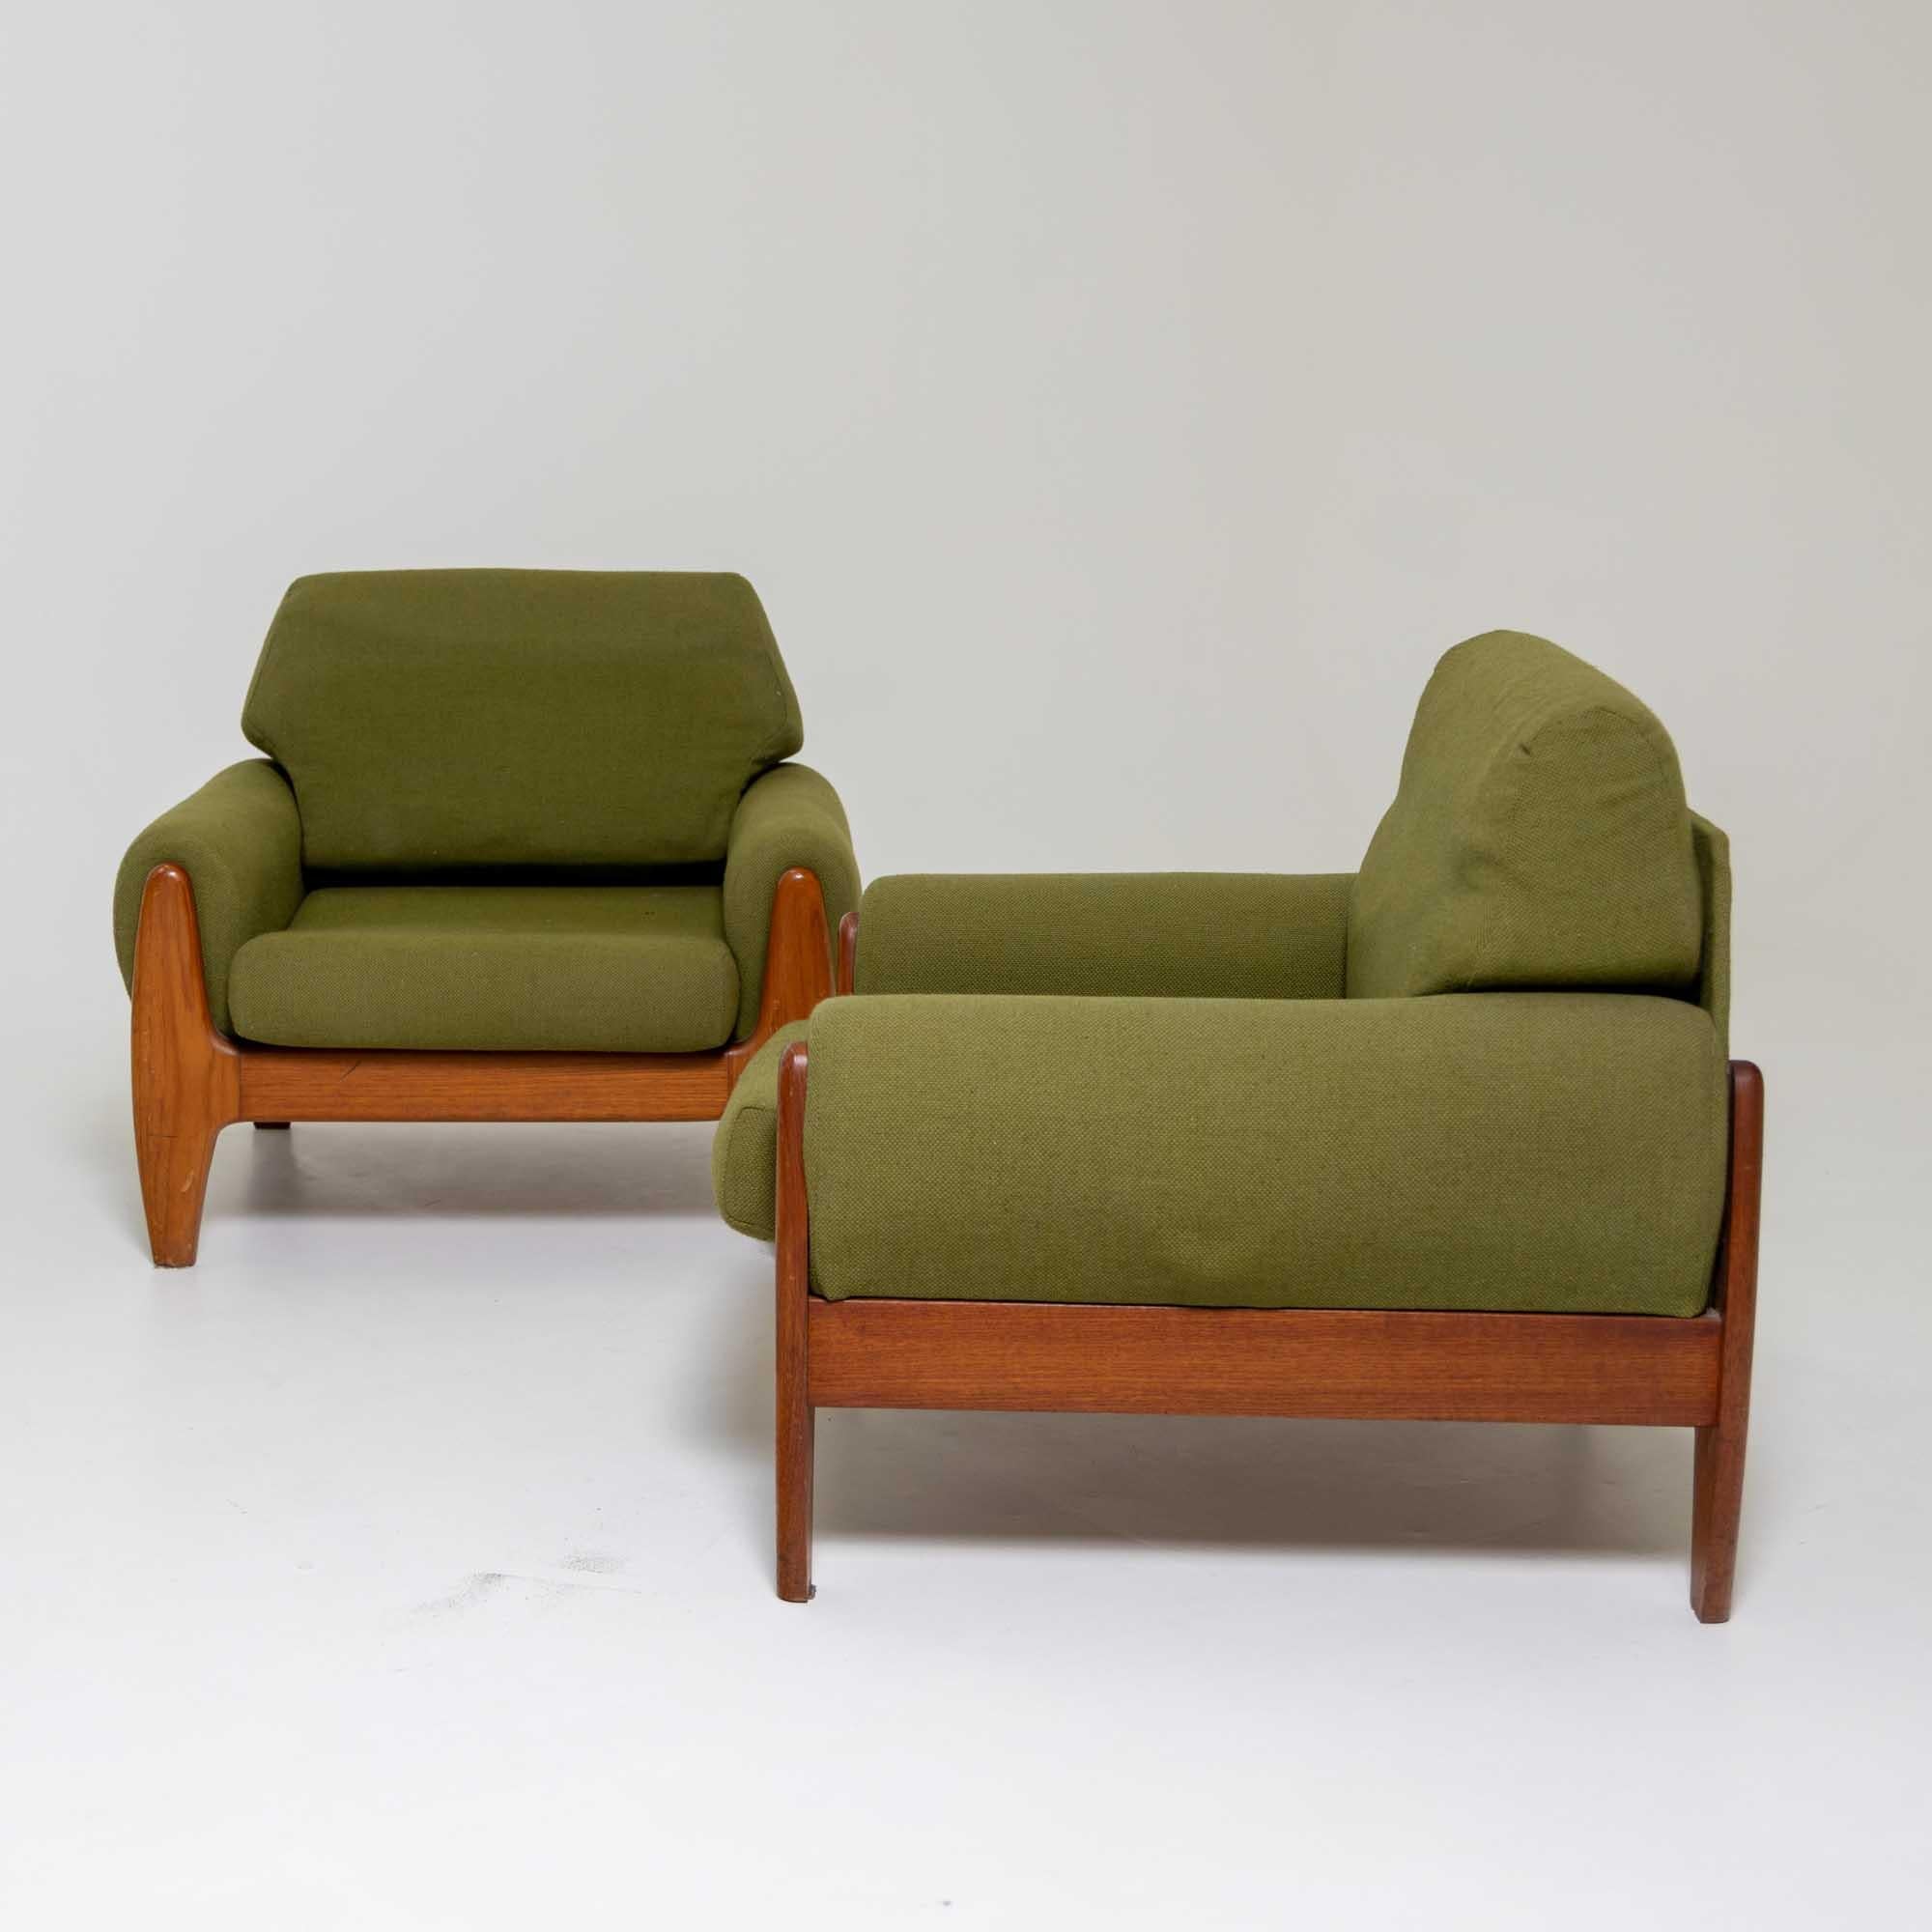 Teak Pair of Armchairs with Green Upholstery, by Illum Denmark, Mid-20th Century For Sale